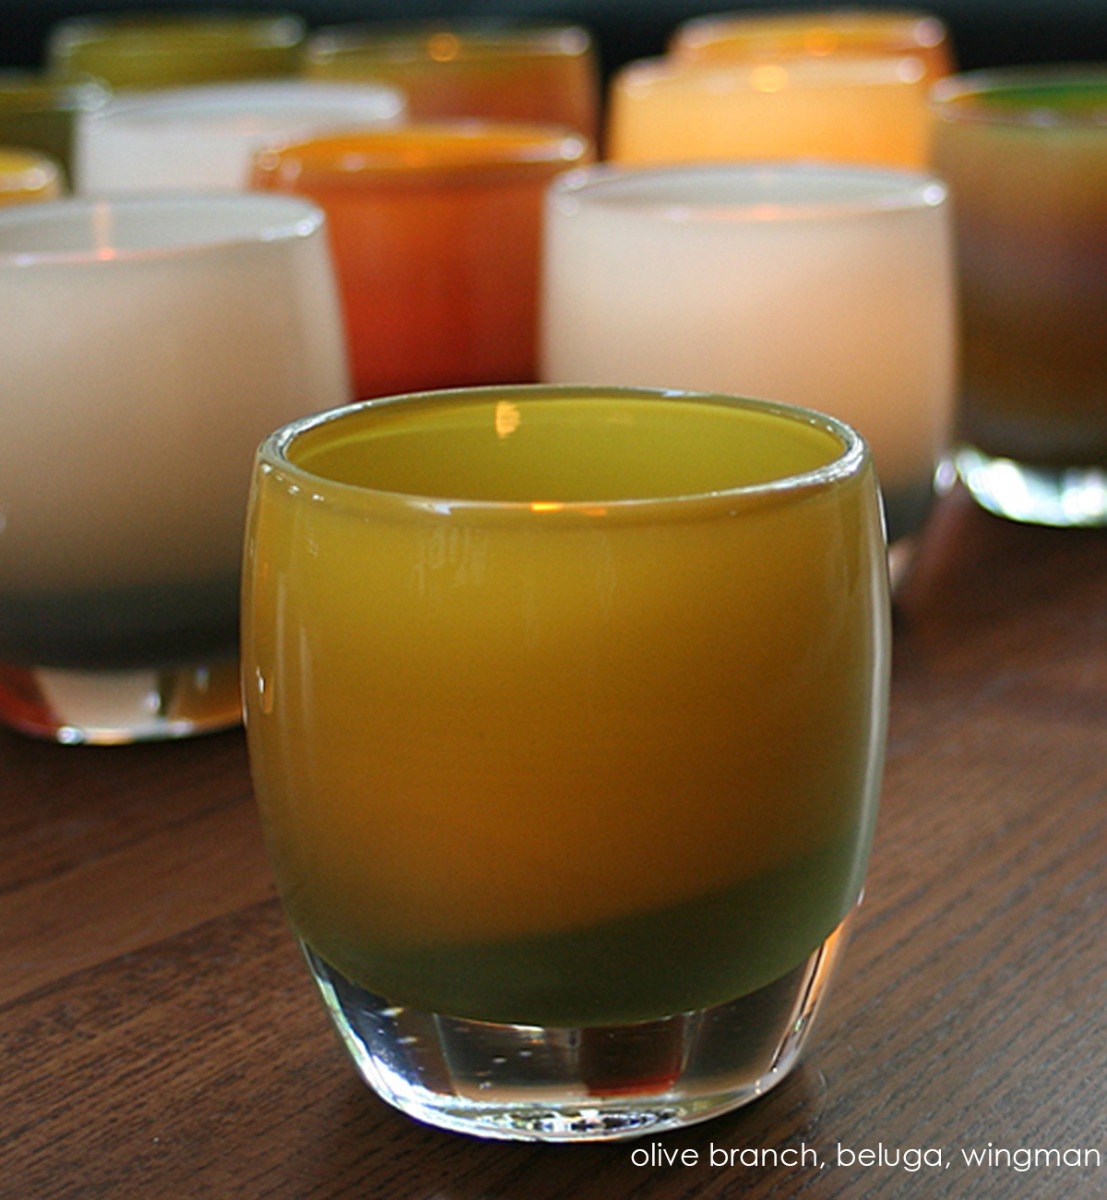 olive branch, green olive hand-blown glass votive candle holder. Paired with beluga and wingman.